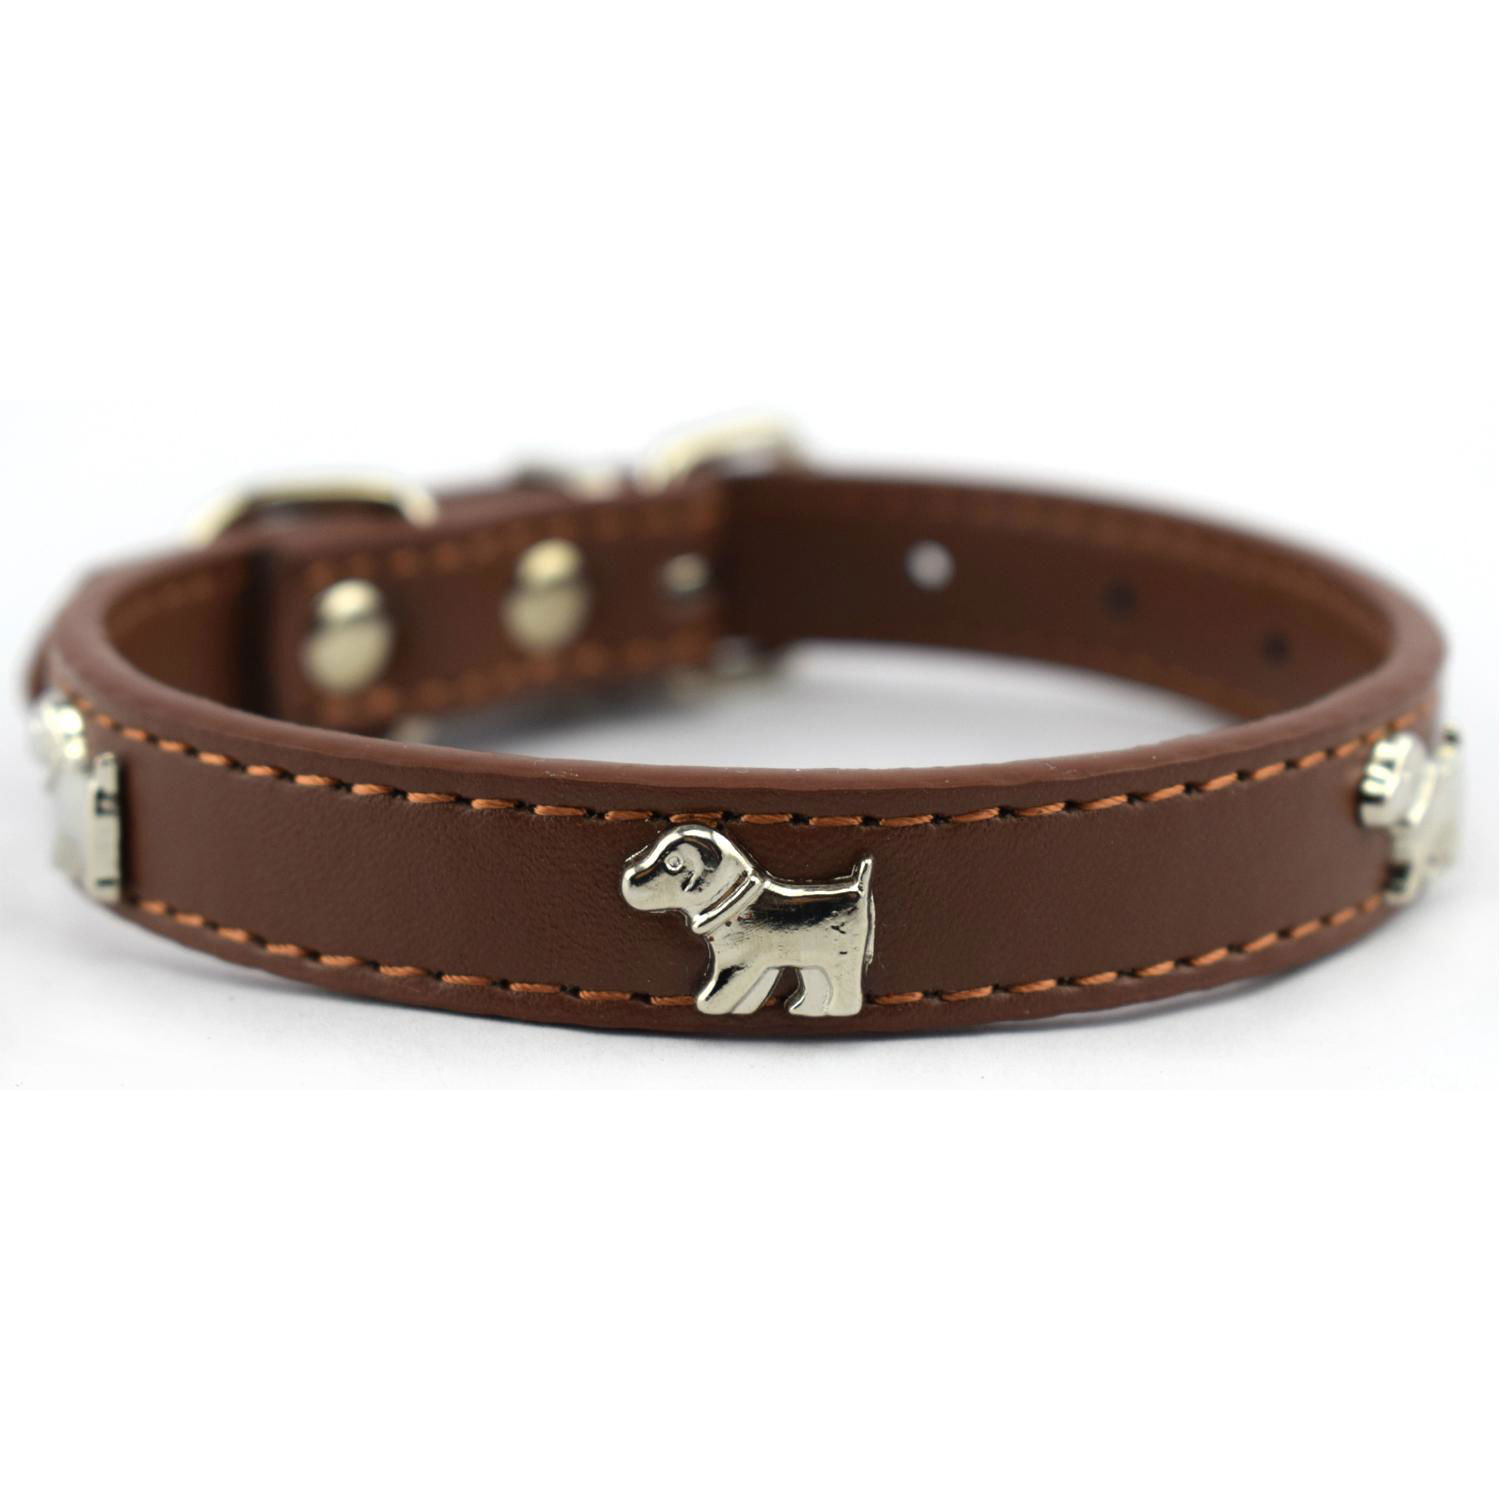 PU dog collars with dog tag accessories 